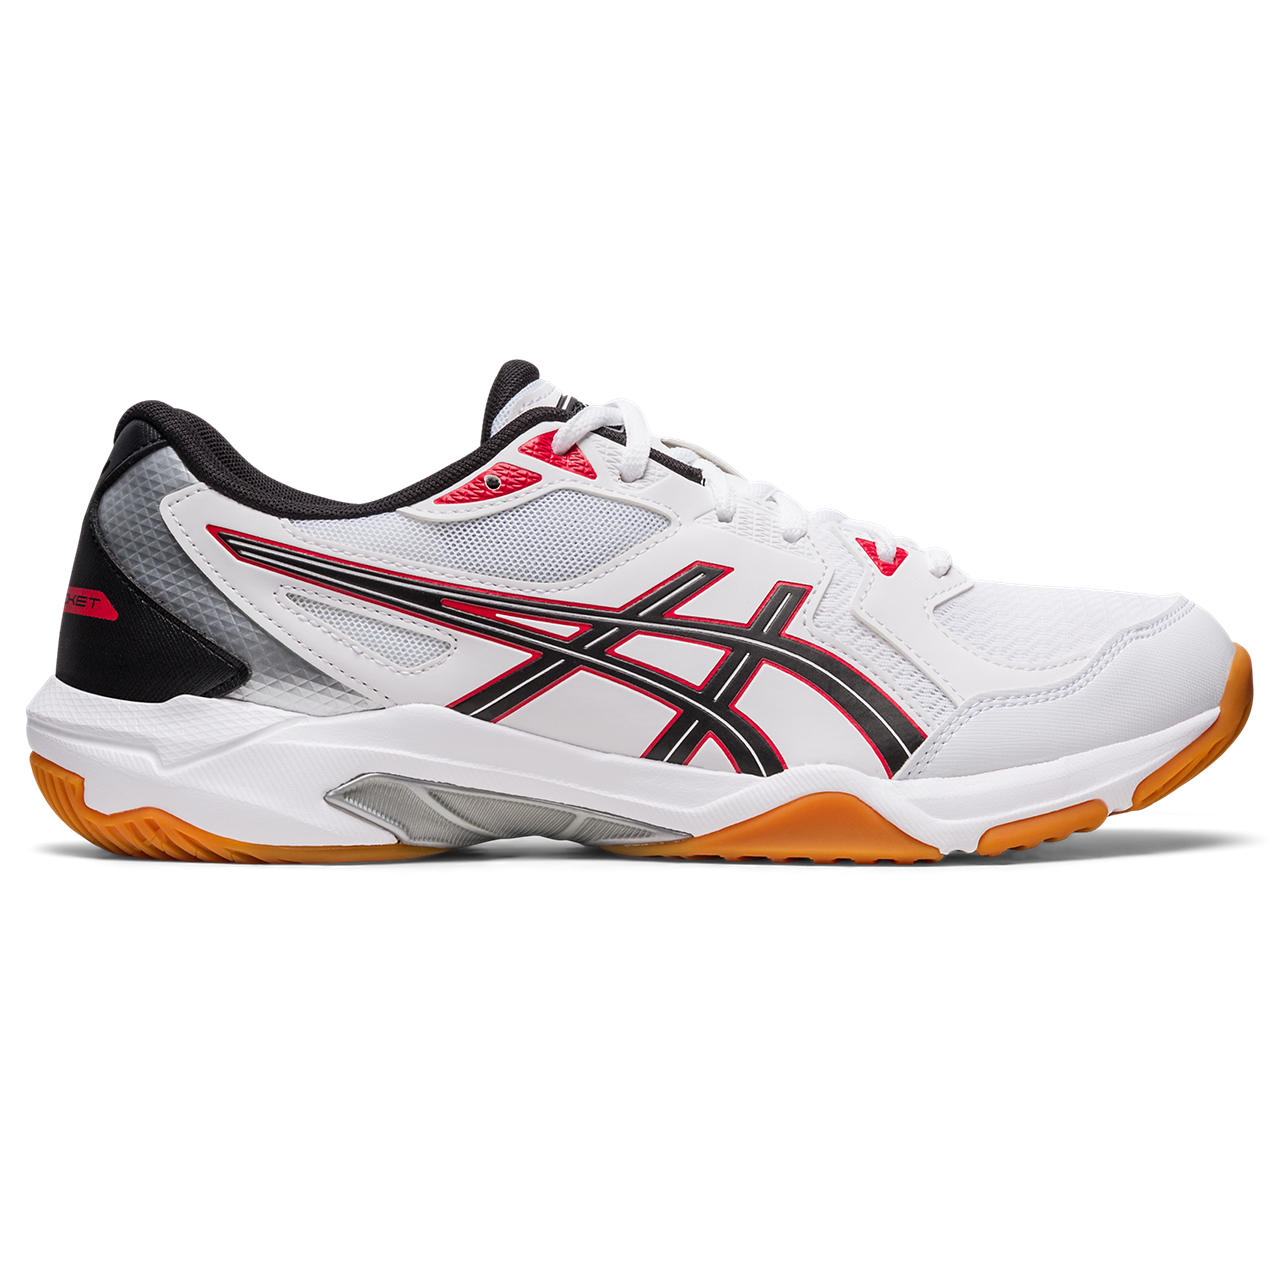 ASICS GEL-ROCKET 10, WHITE/CLASSIC RED, swatch